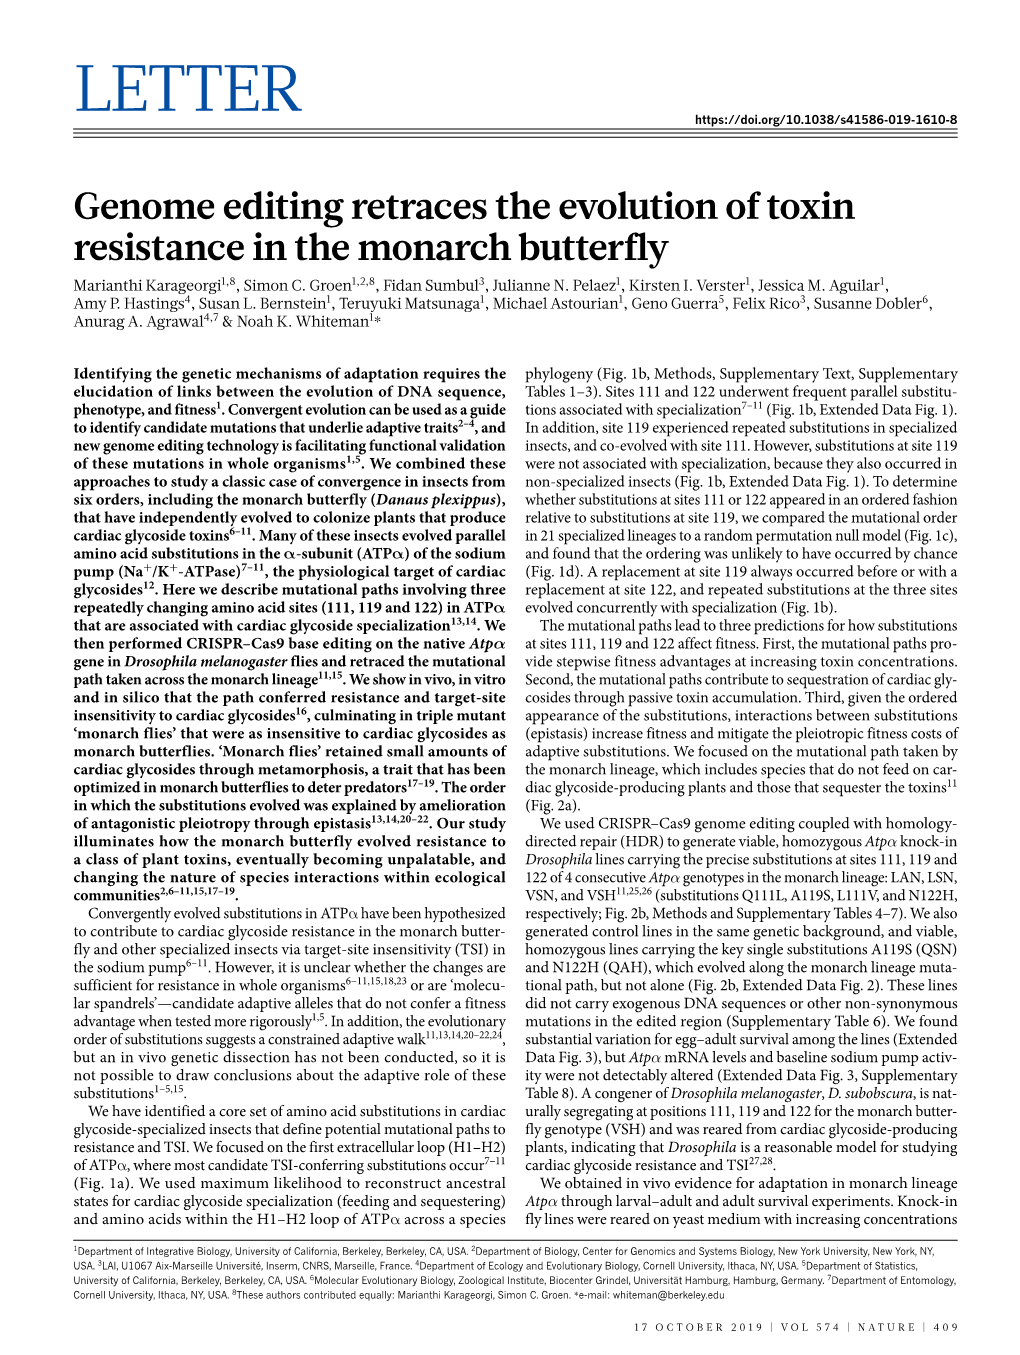 Genome Editing Retraces the Evolution of Toxin Resistance in the Monarch Butterfly Marianthi Karageorgi1,8, Simon C